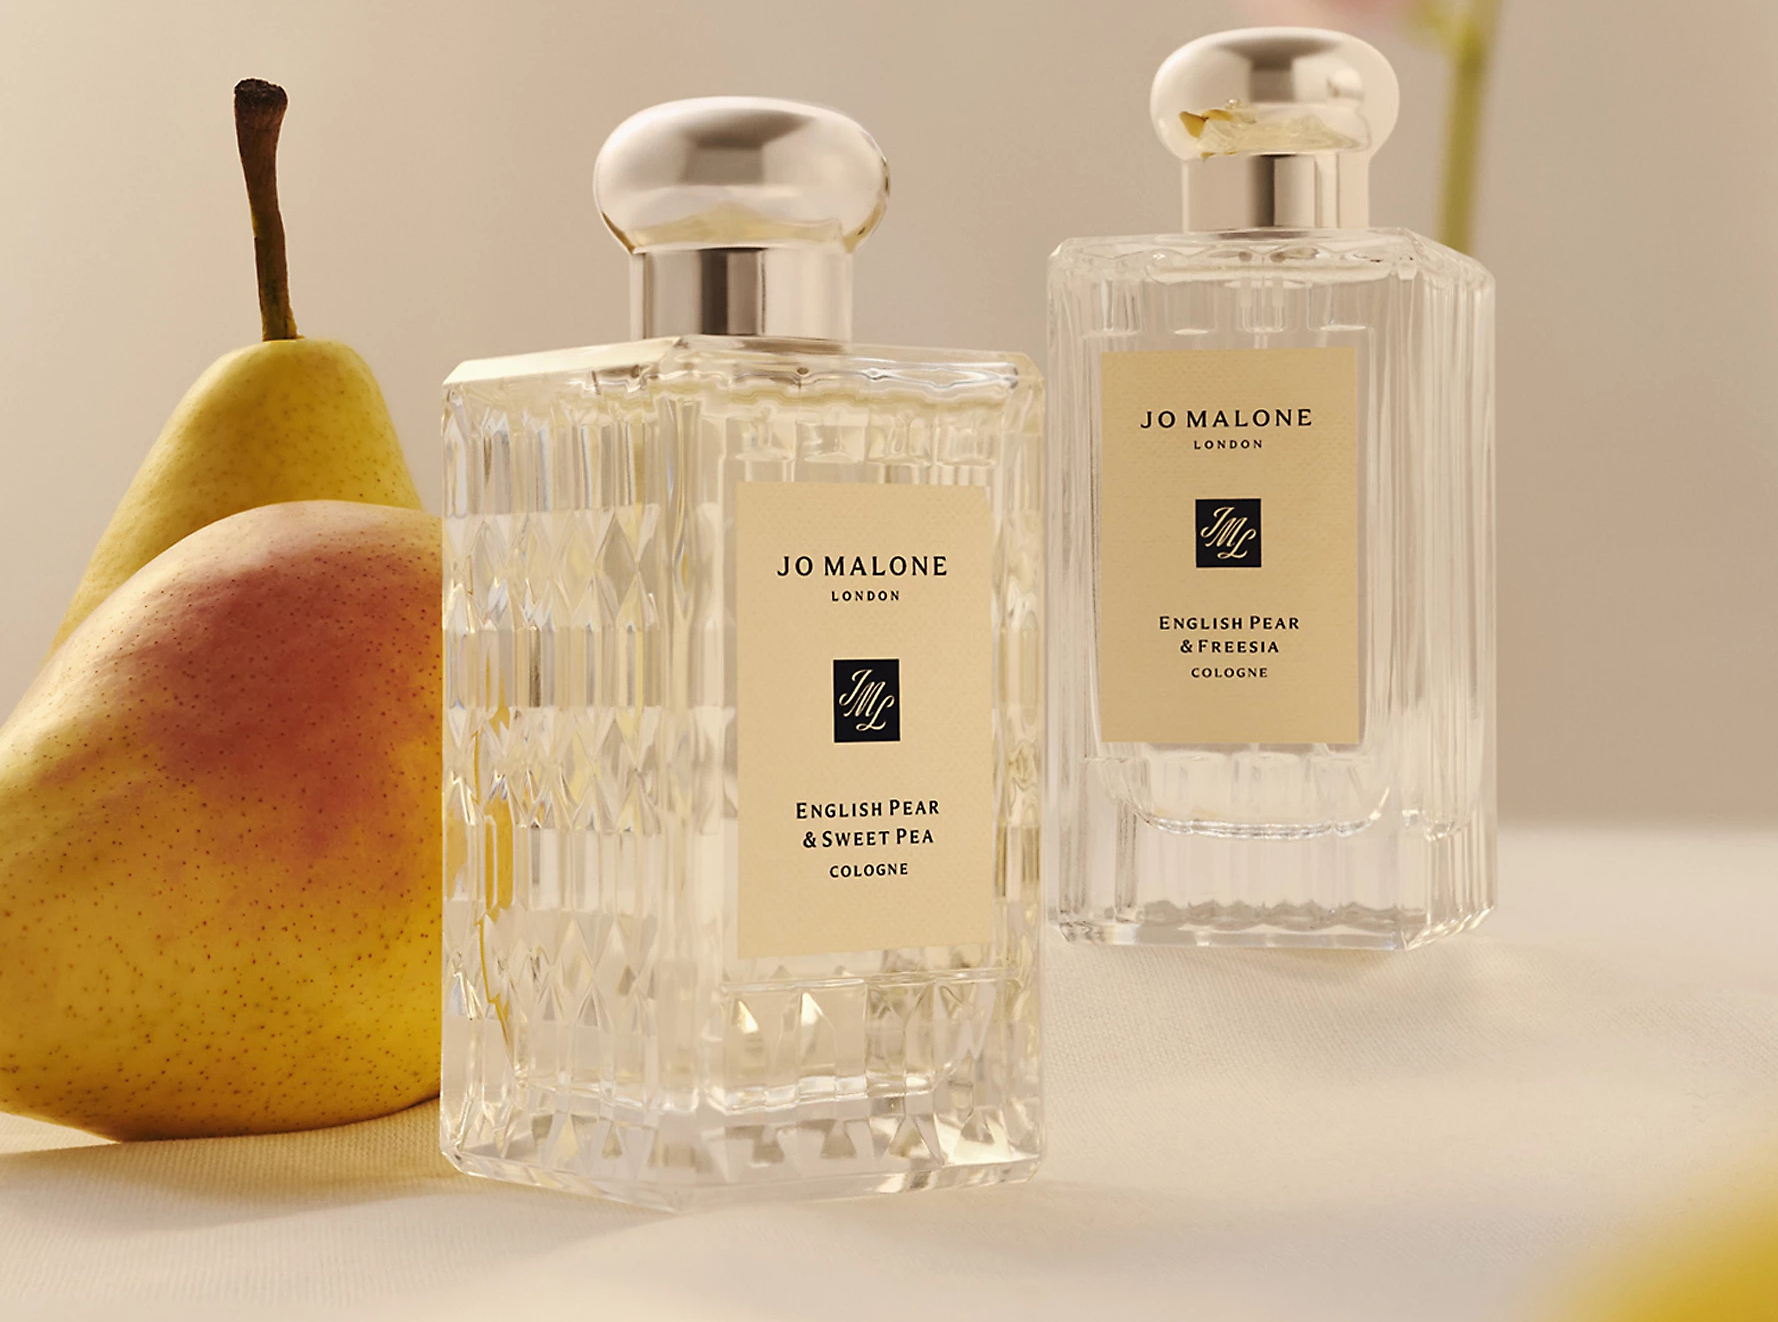 New launches from Jo Malone